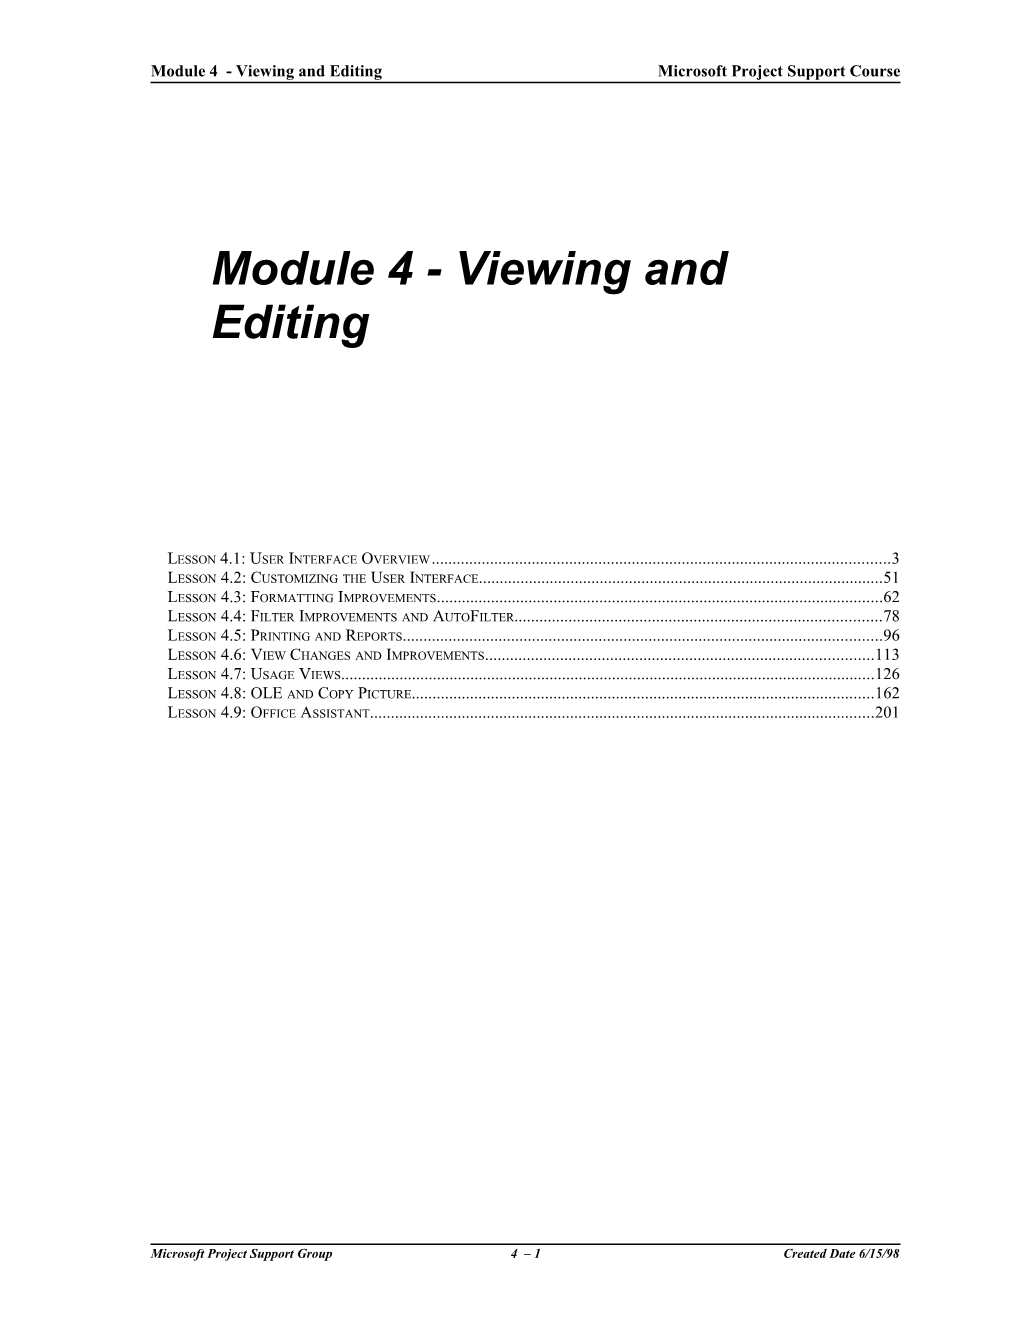 Module 4 - Viewing and Editing